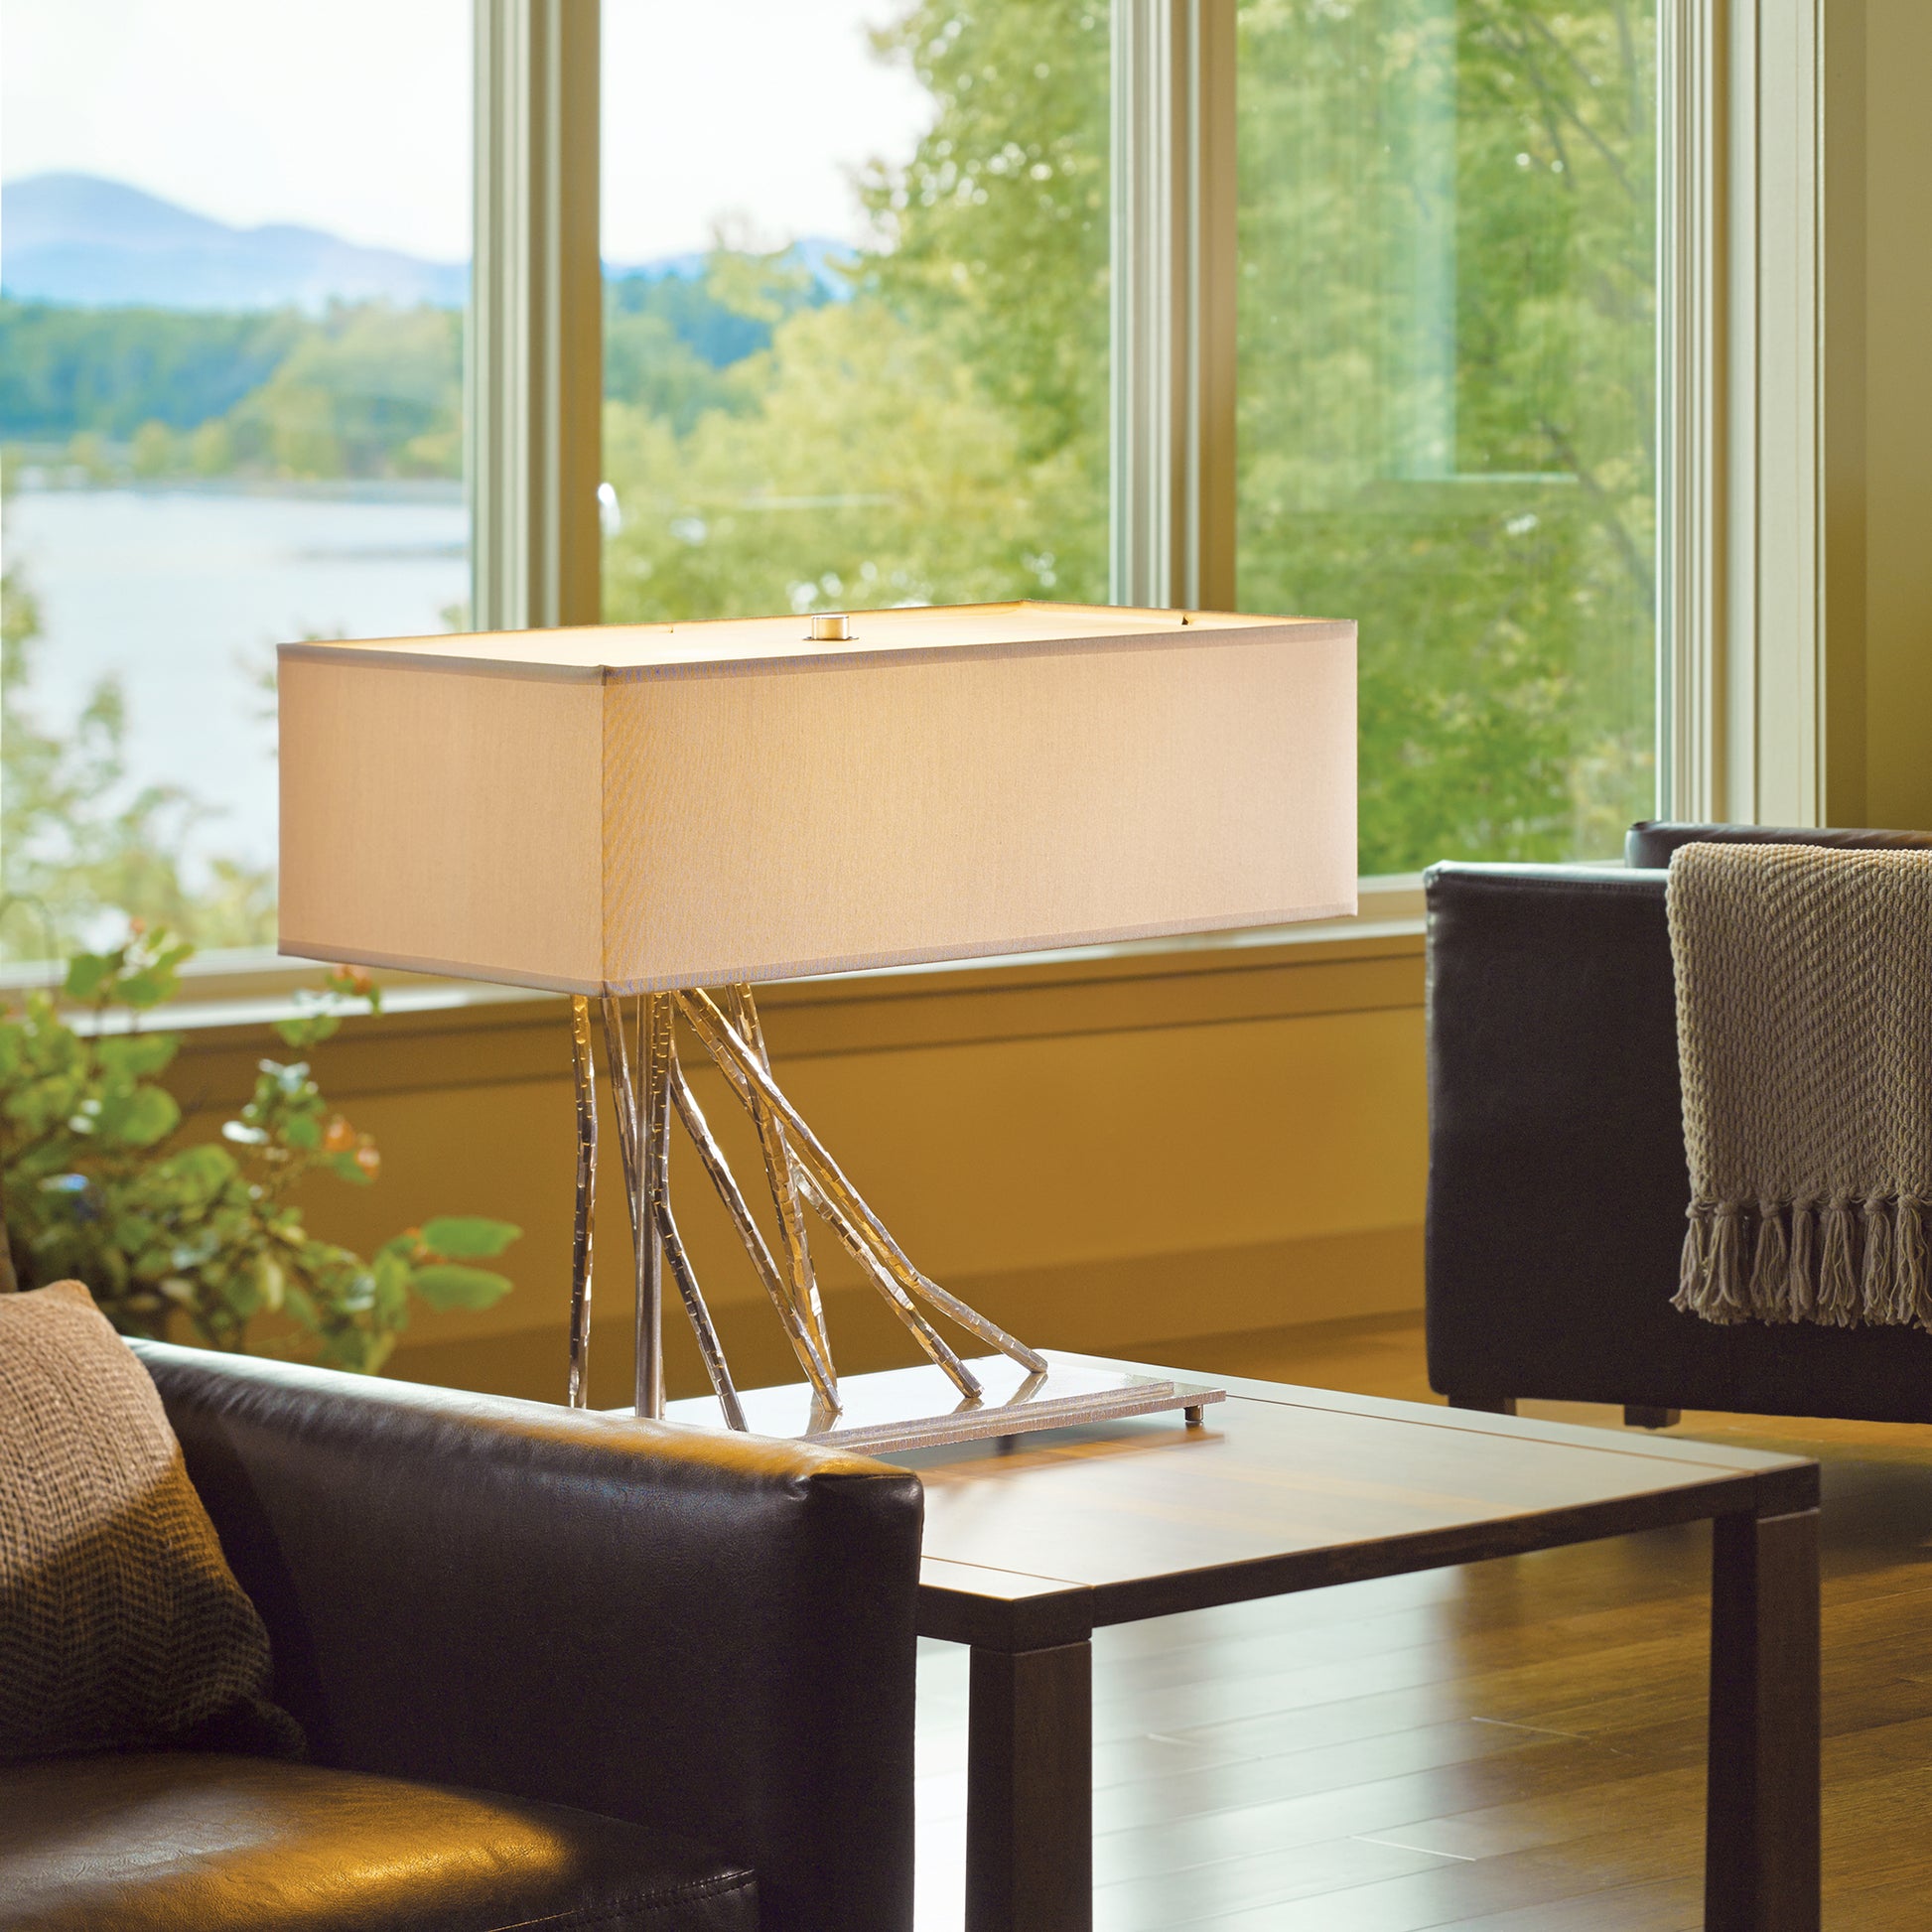 A contemporary room with a large window overlooking a scenic lake. A Hubbardton Forge Brindille Table Lamp with a unique metal base and rectangular shade stands on a small table between two dark leather chairs. A woven throw drapes